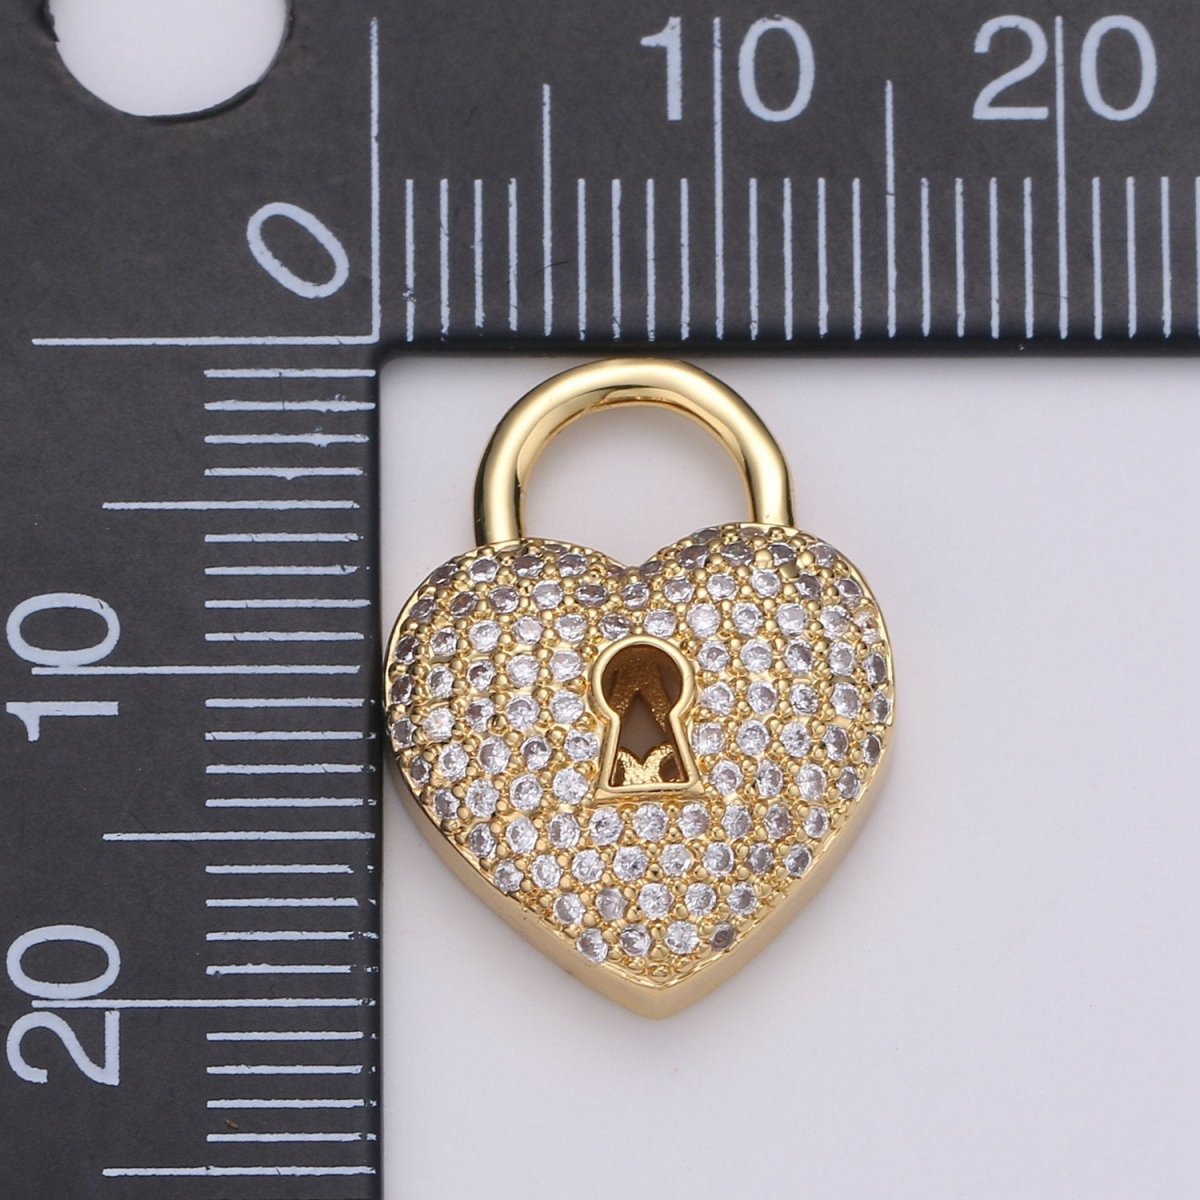 24k Gold Filled Padlock Charm Gold CZ Micro Pave Charm Pendant Heart Lock Charm Necklace for Statement Necklace Component D-618 - DLUXCA